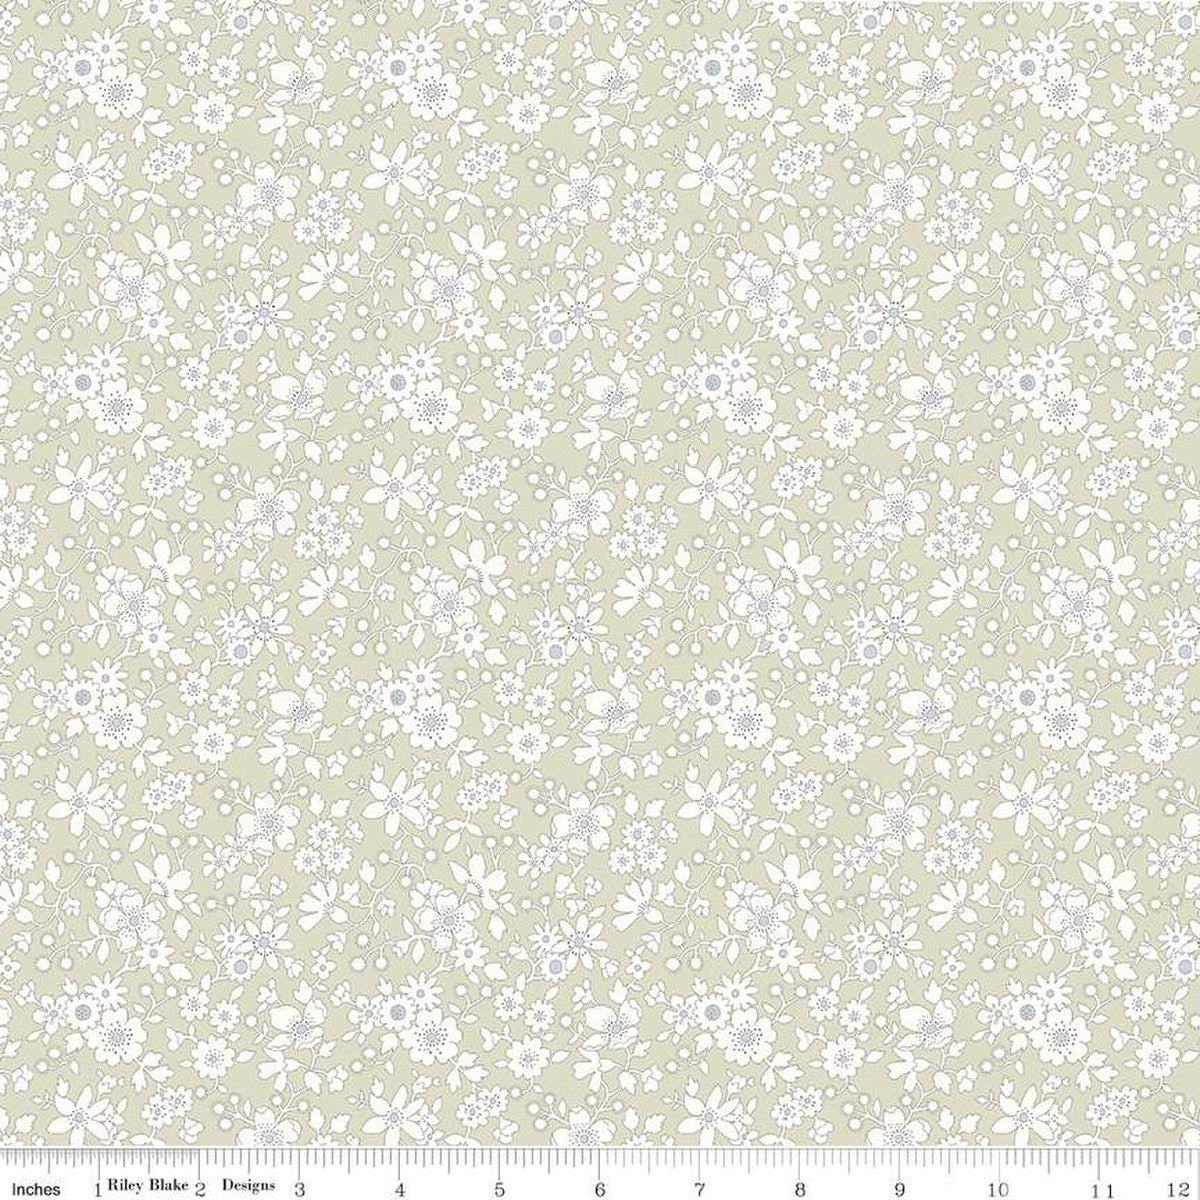 Flower Show Pebble Maddsie Silhouette A Fabric - By the yard